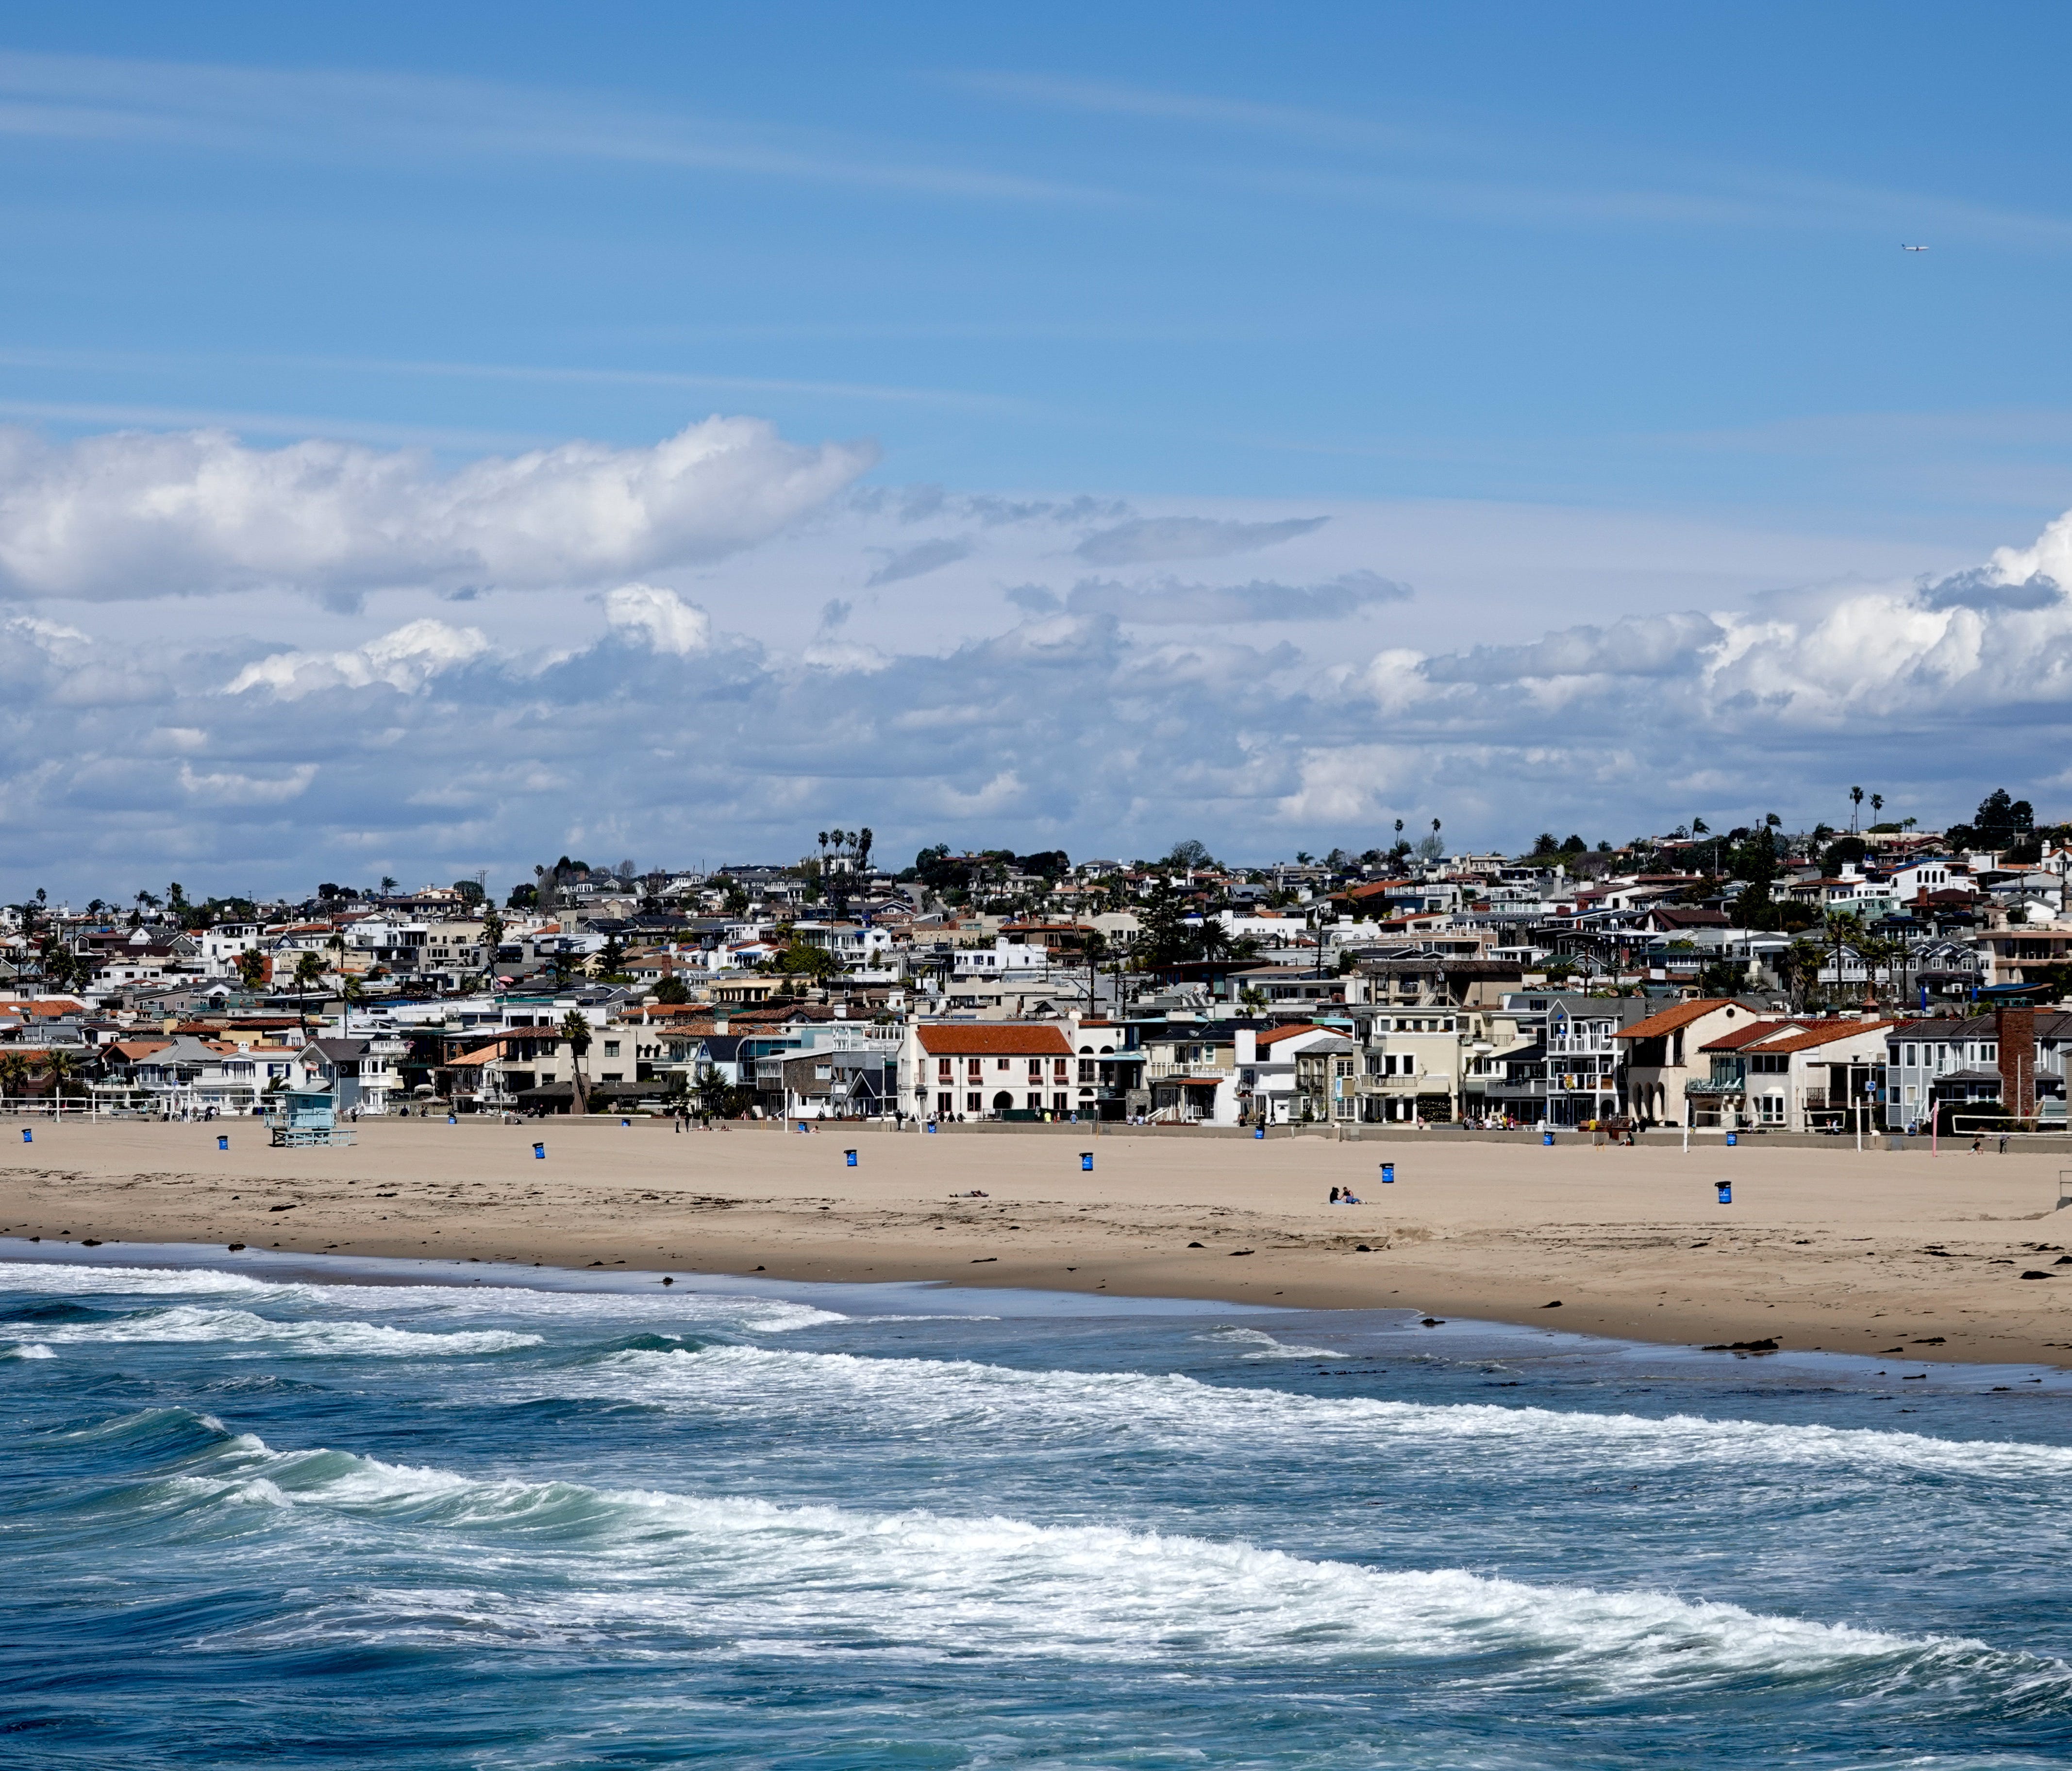 A view of the Hermosa Beach coastline from the Hermoa Pier